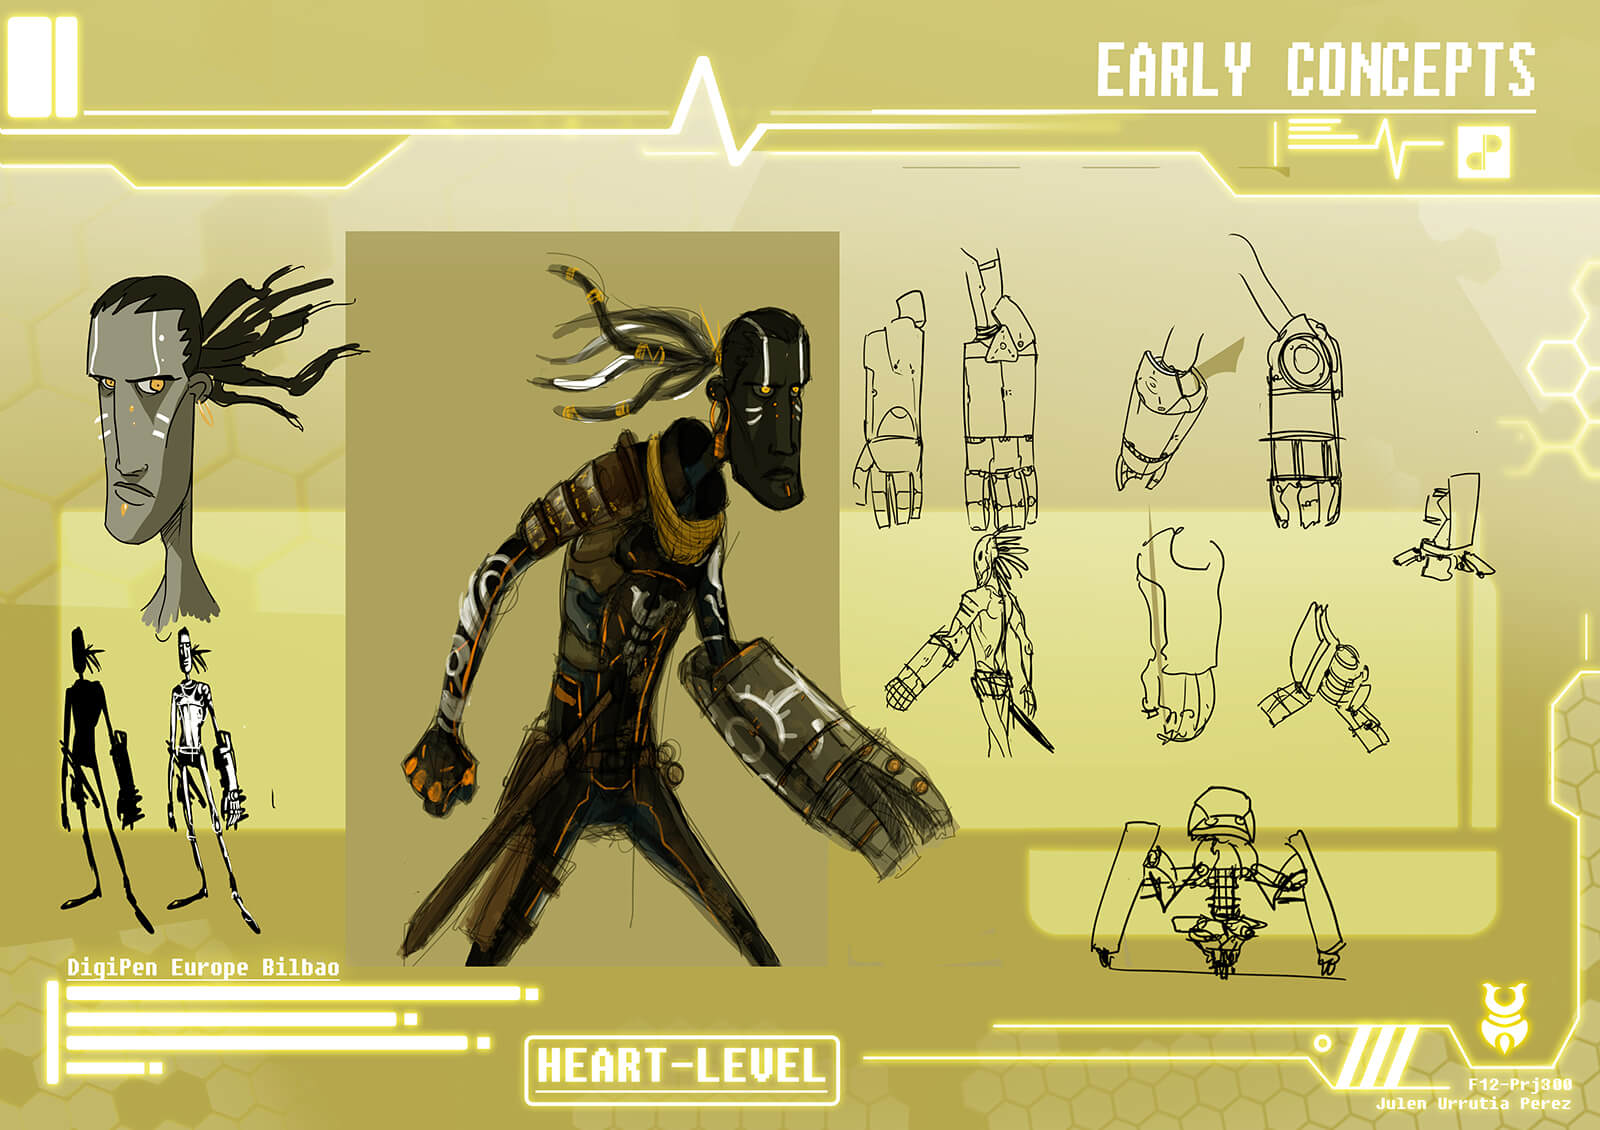 Concept art of character from the film Heart Level, including detail or arm armor and other equipment